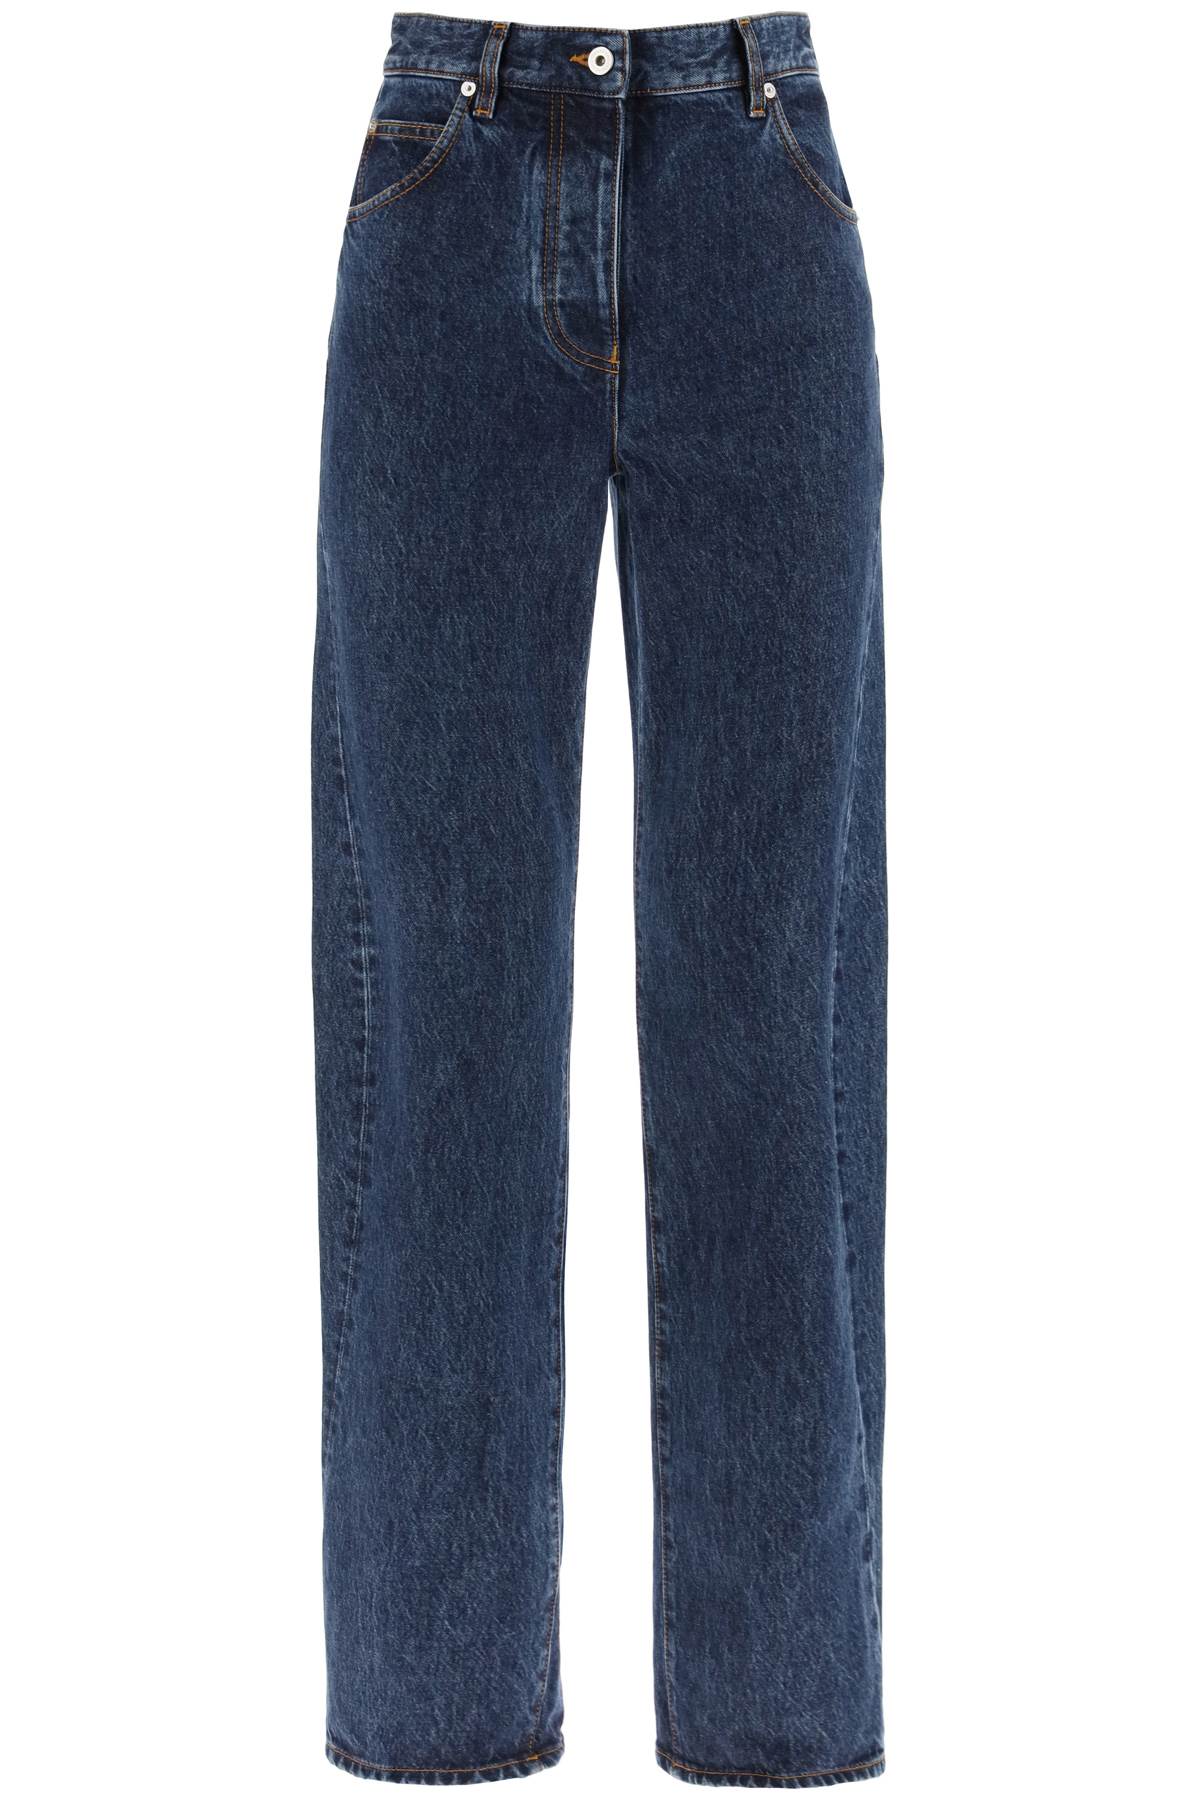 Ferragamo Jeans With Shaped Seams In Blue